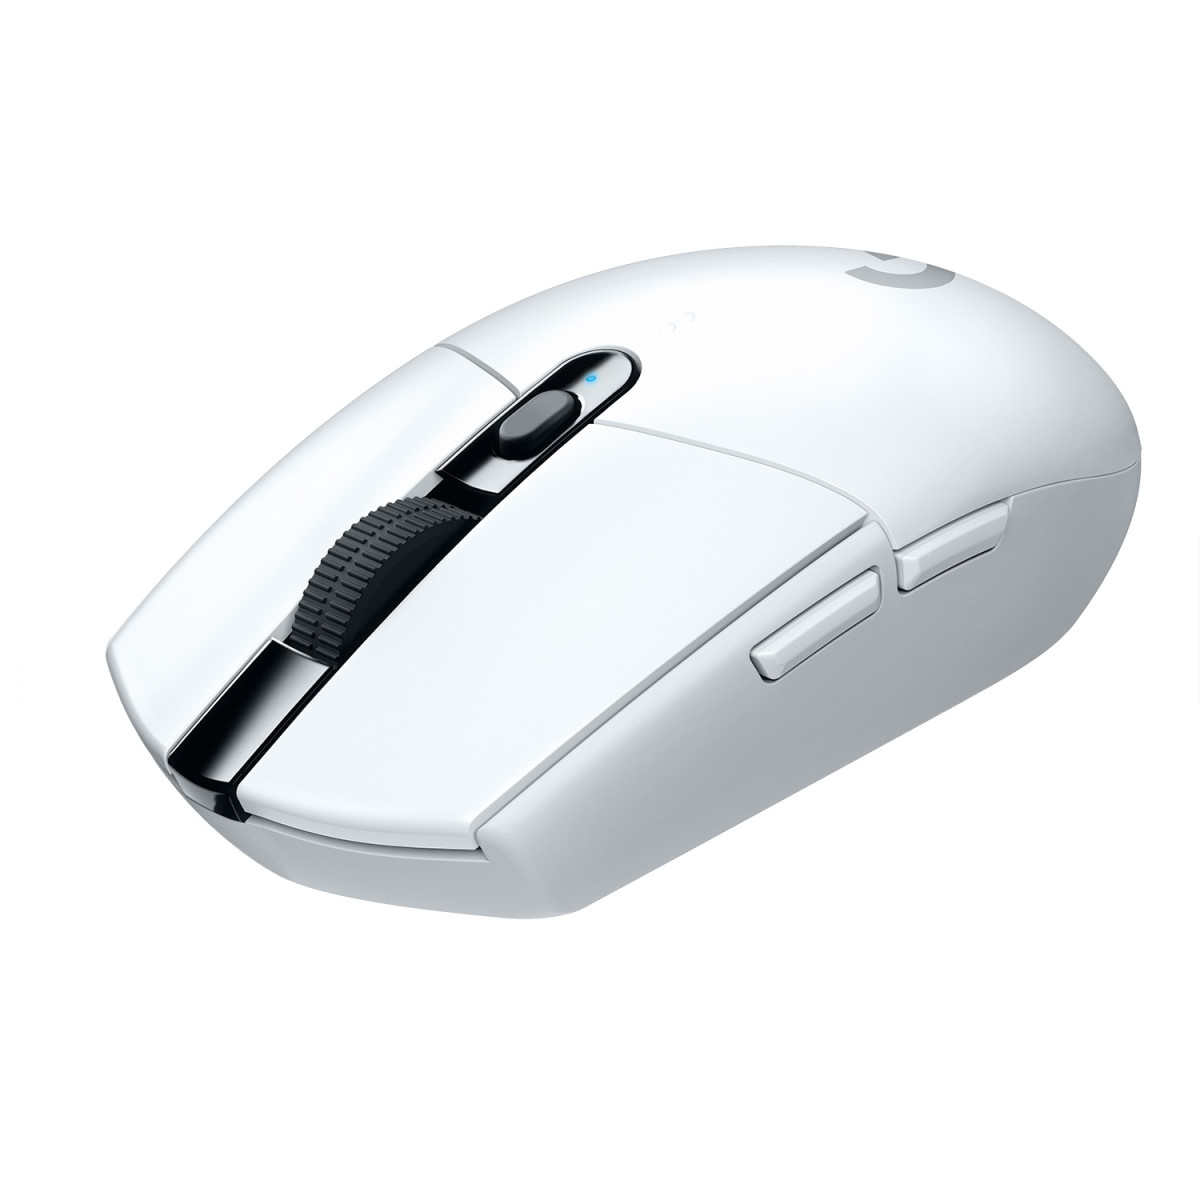 G305 lightspeed Wireless Gaming Mouse